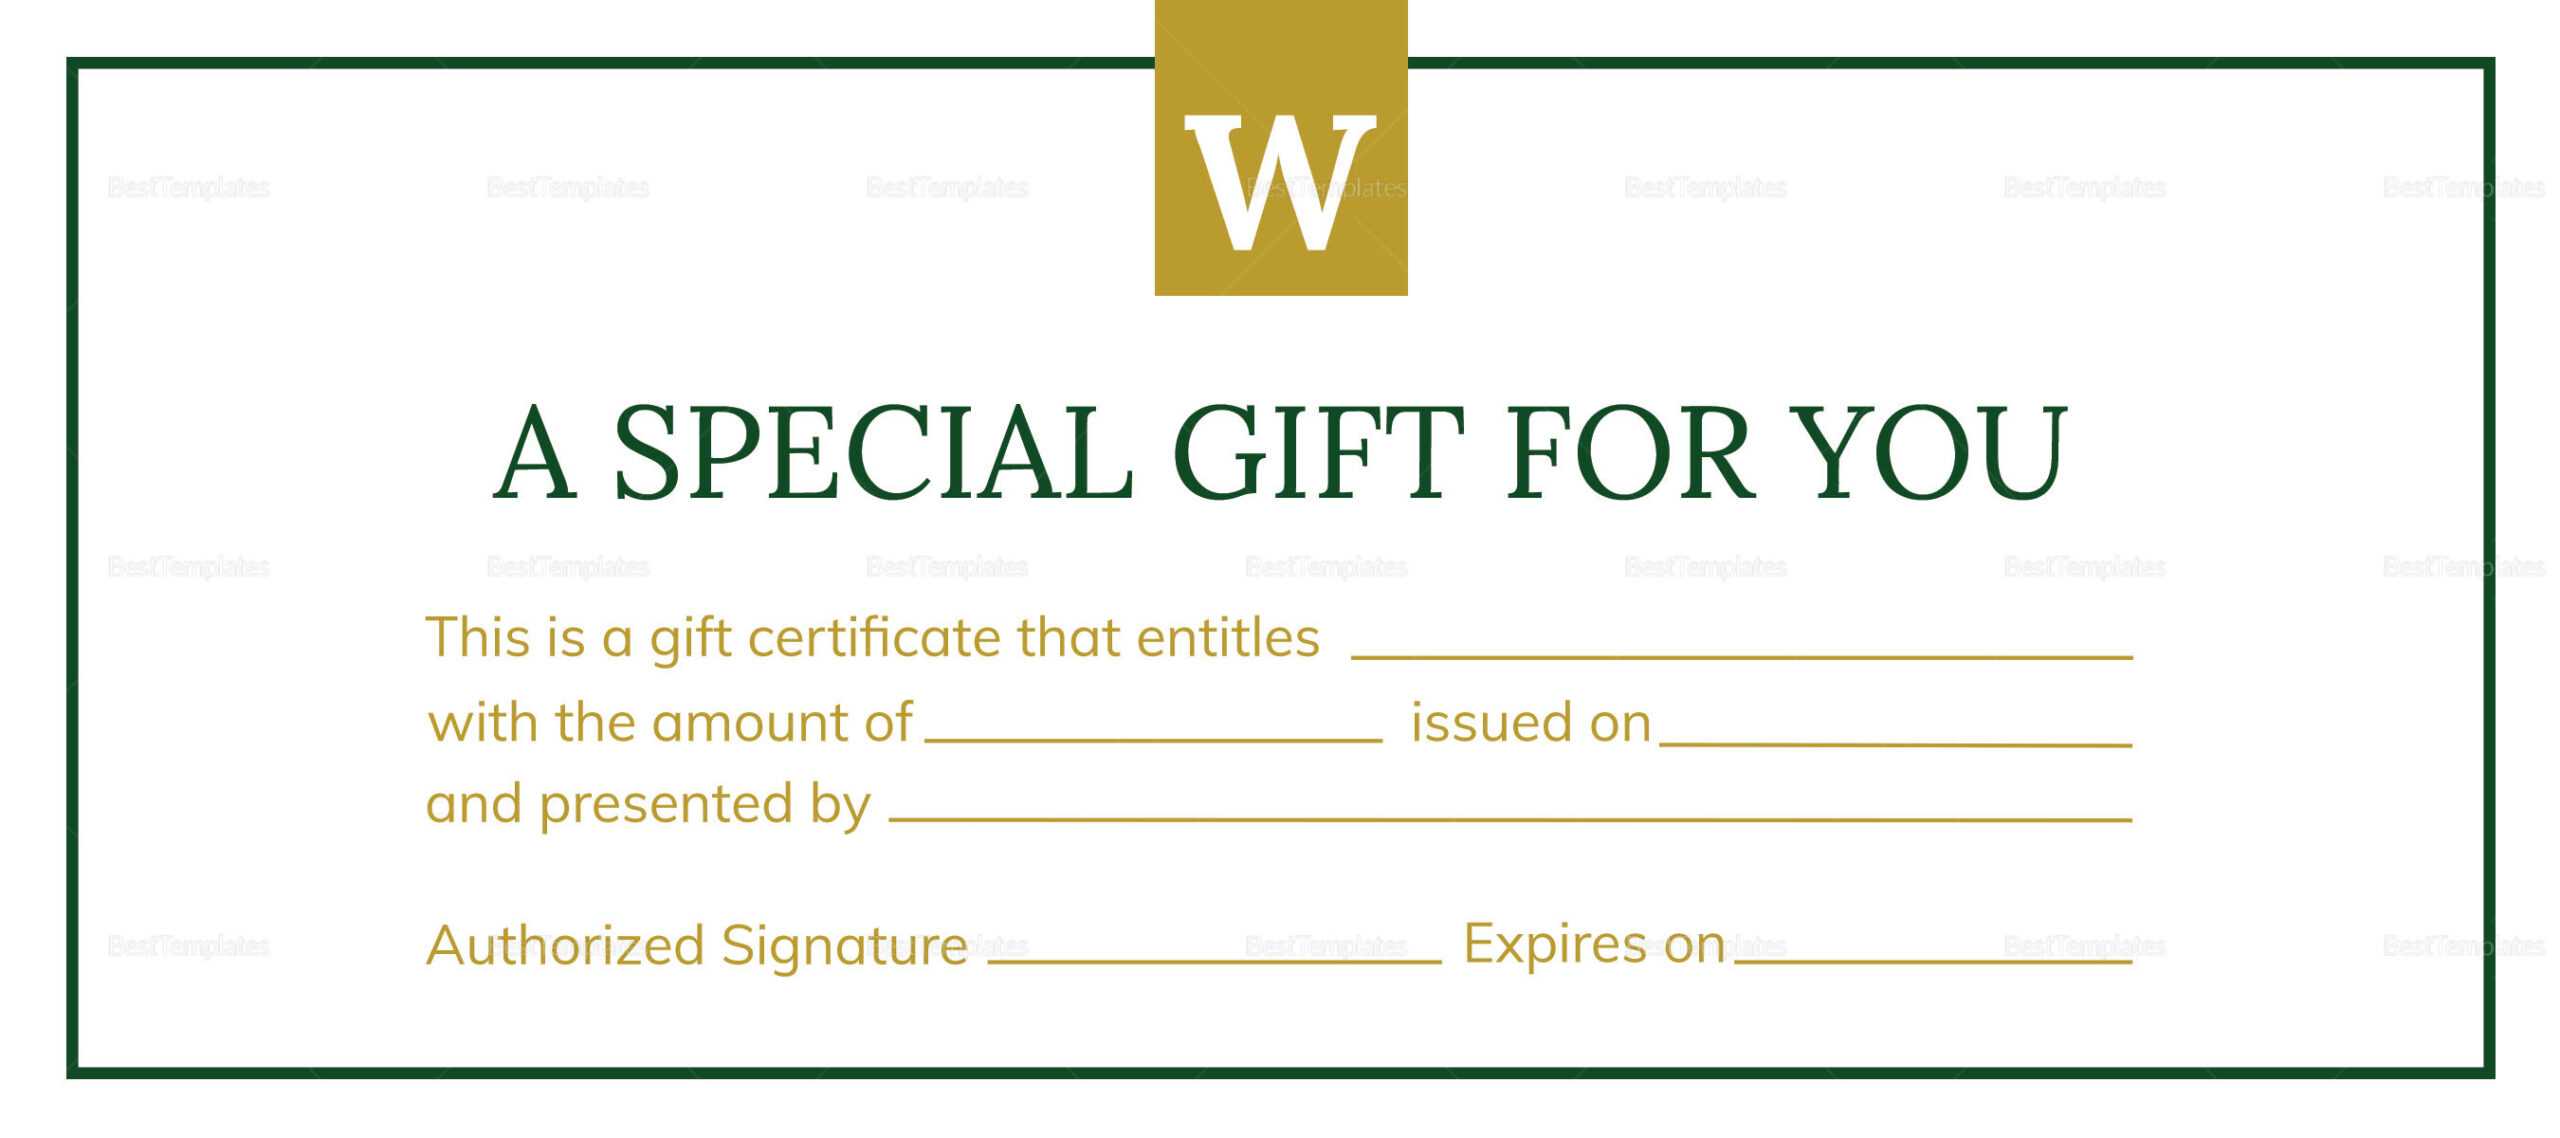 Gift Certificate Templates Indesign Illustrator Gift Coupon For Gift Certificate Template Indesign